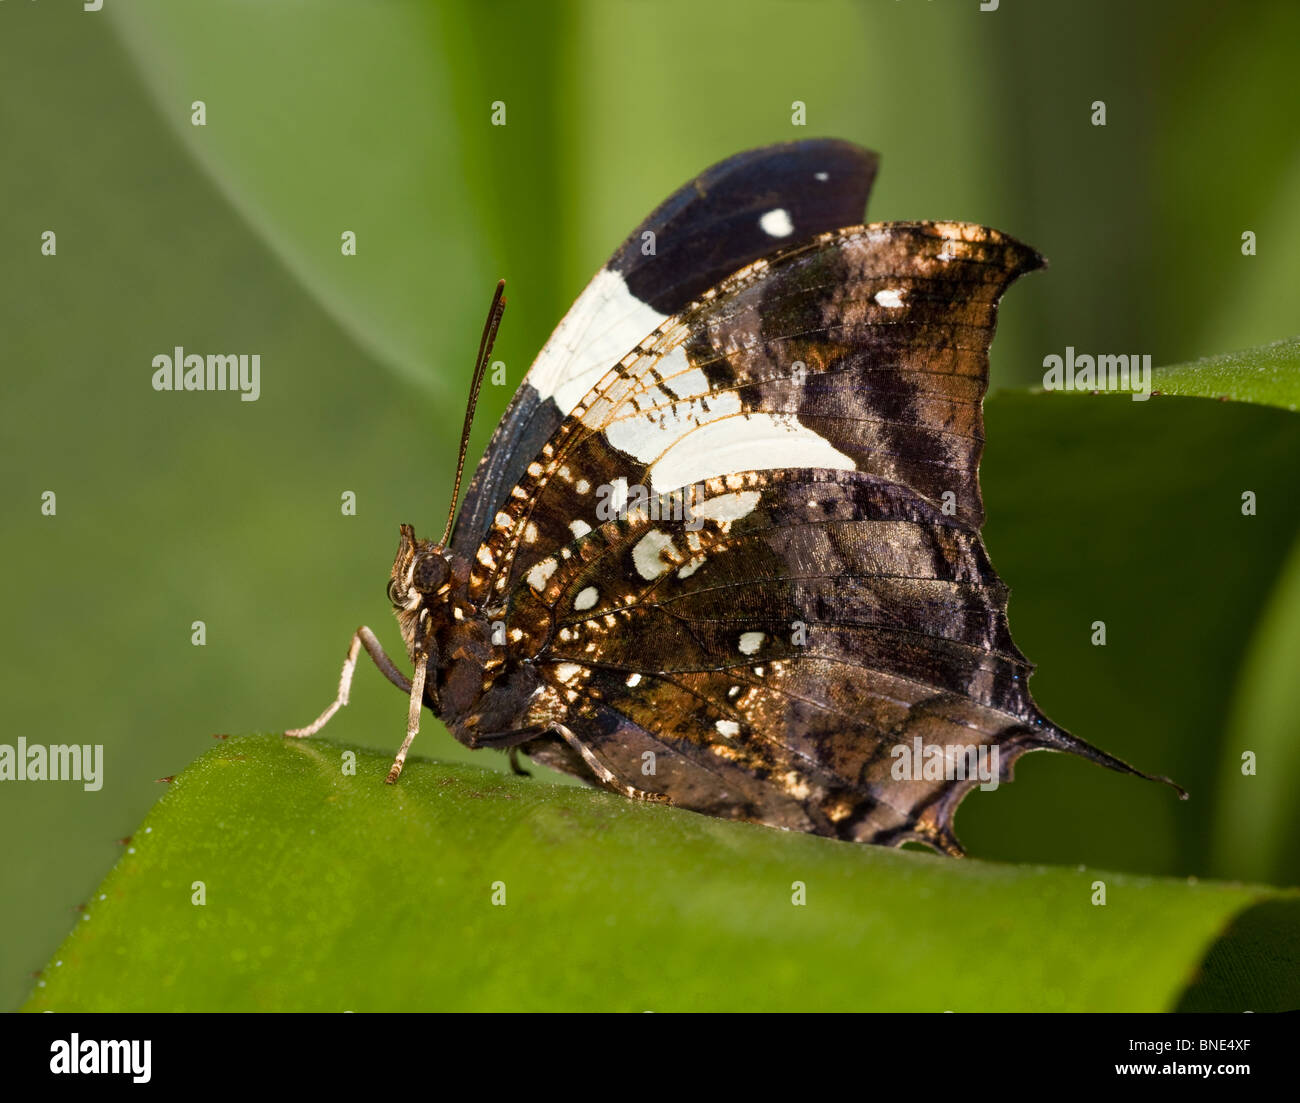 Close-up of a Silver-studded Leafwing butterfly (Hypna clytemnestra) Stock Photo